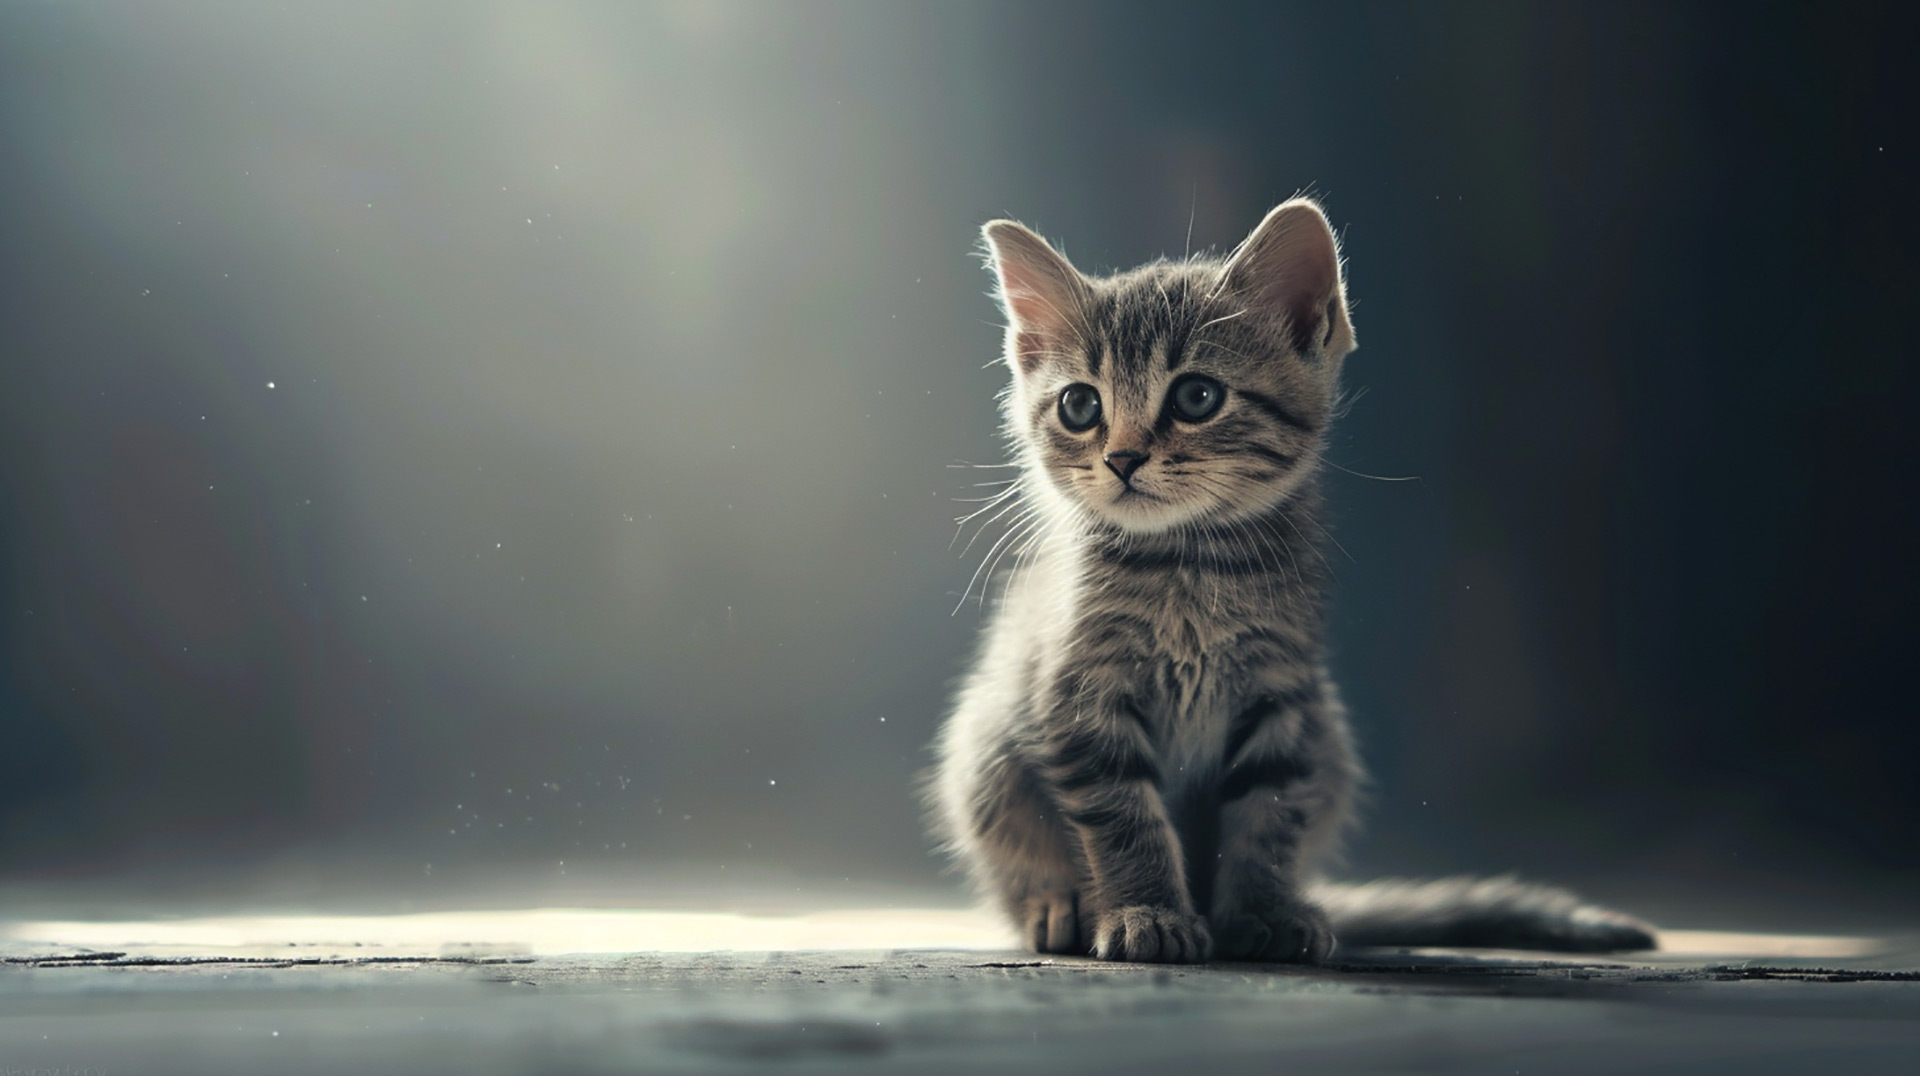 Cute Cat PC Wallpapers: Download Stunning 4K Images